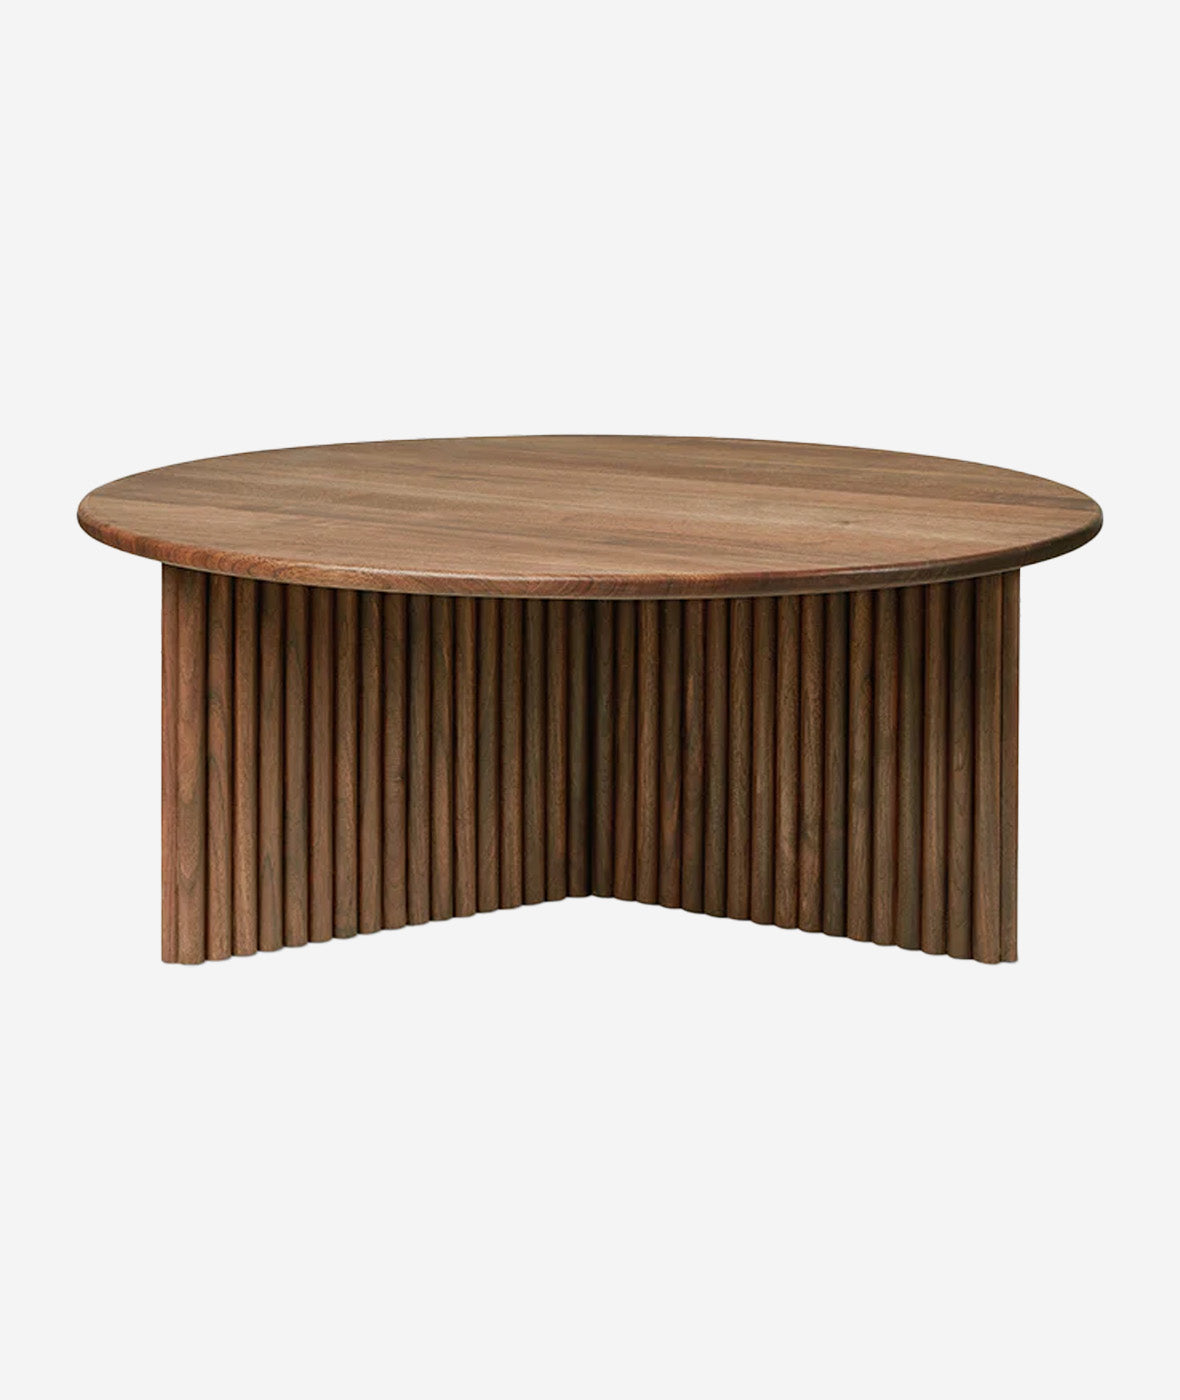 Odeon Coffee Table - More Options